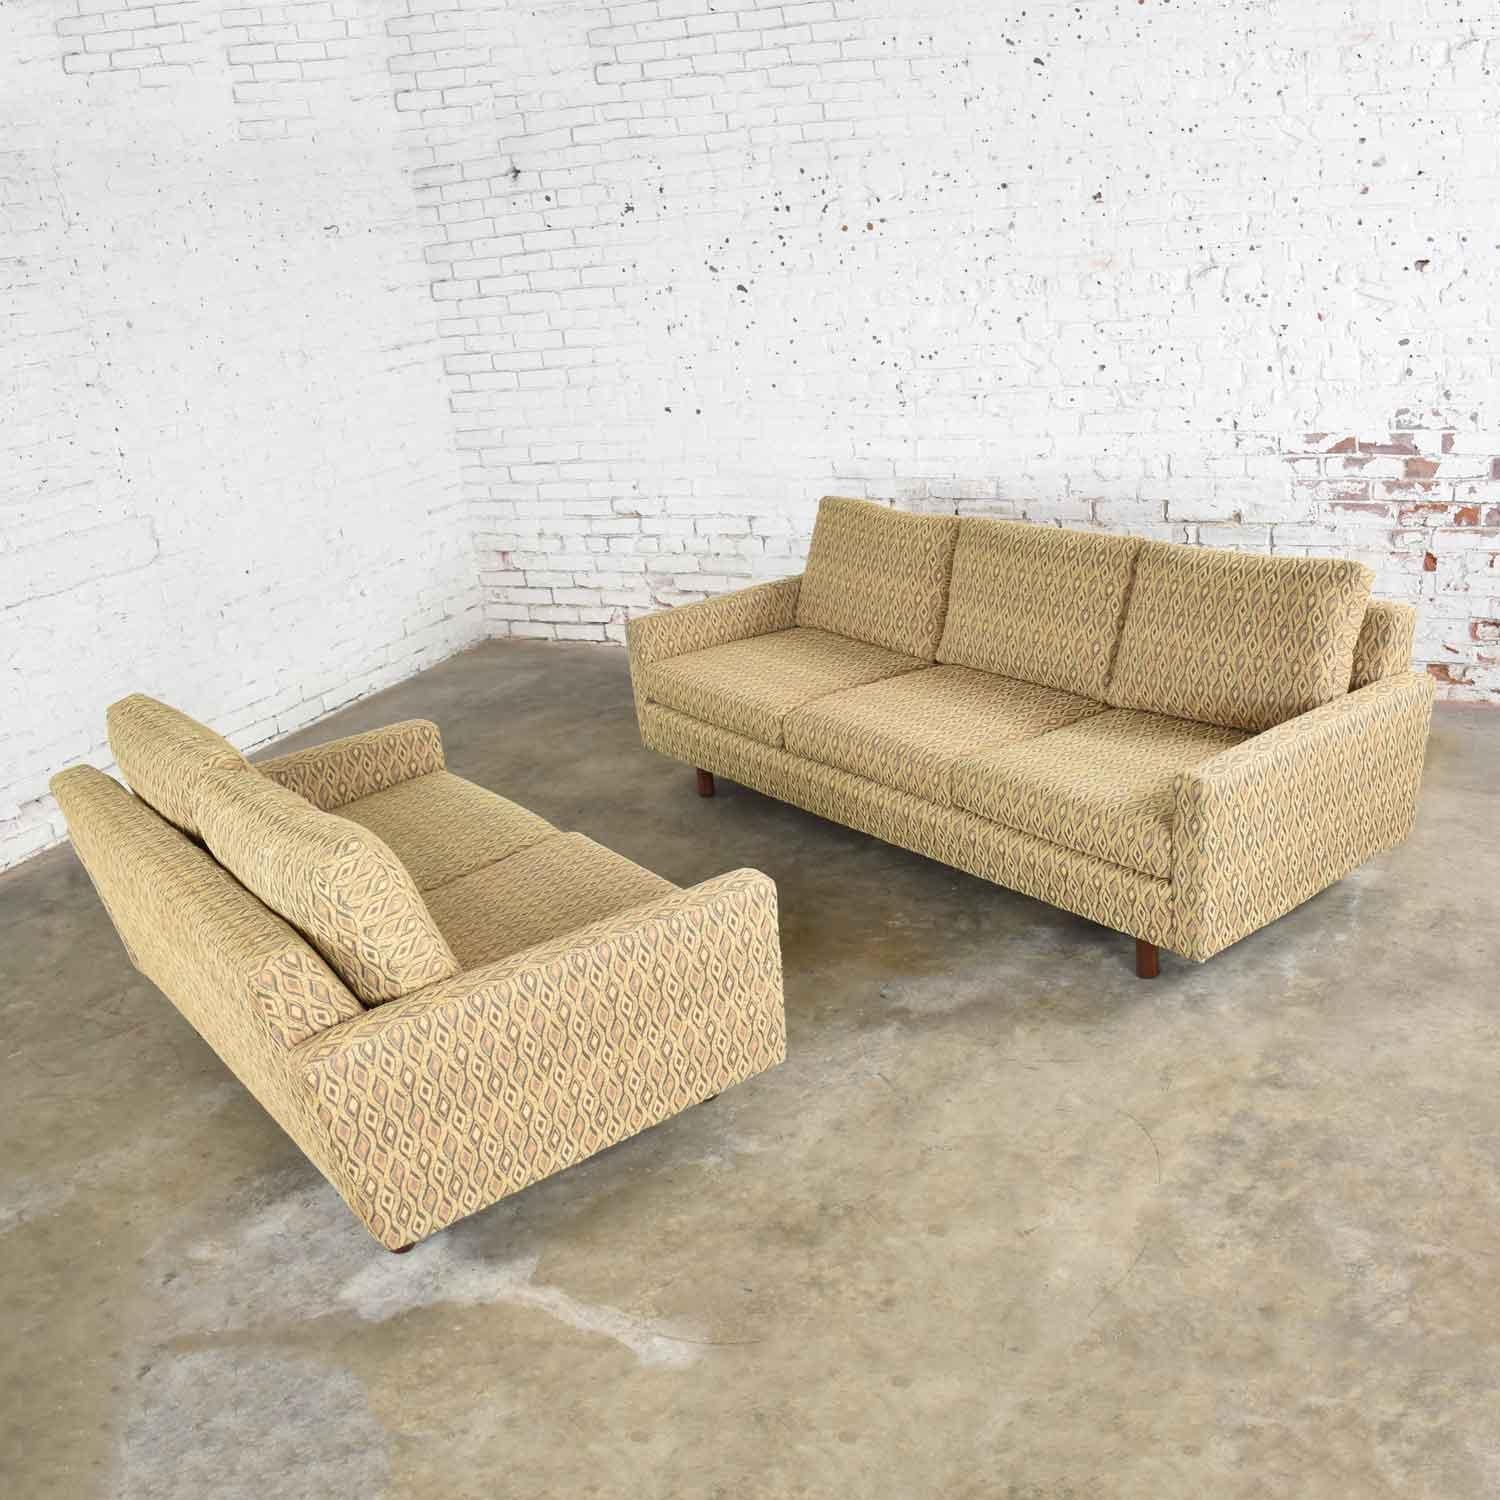 20th Century Mid-Century Modern Sofa & Love Seat Pair Gold Lawson Style after Harvey Probber